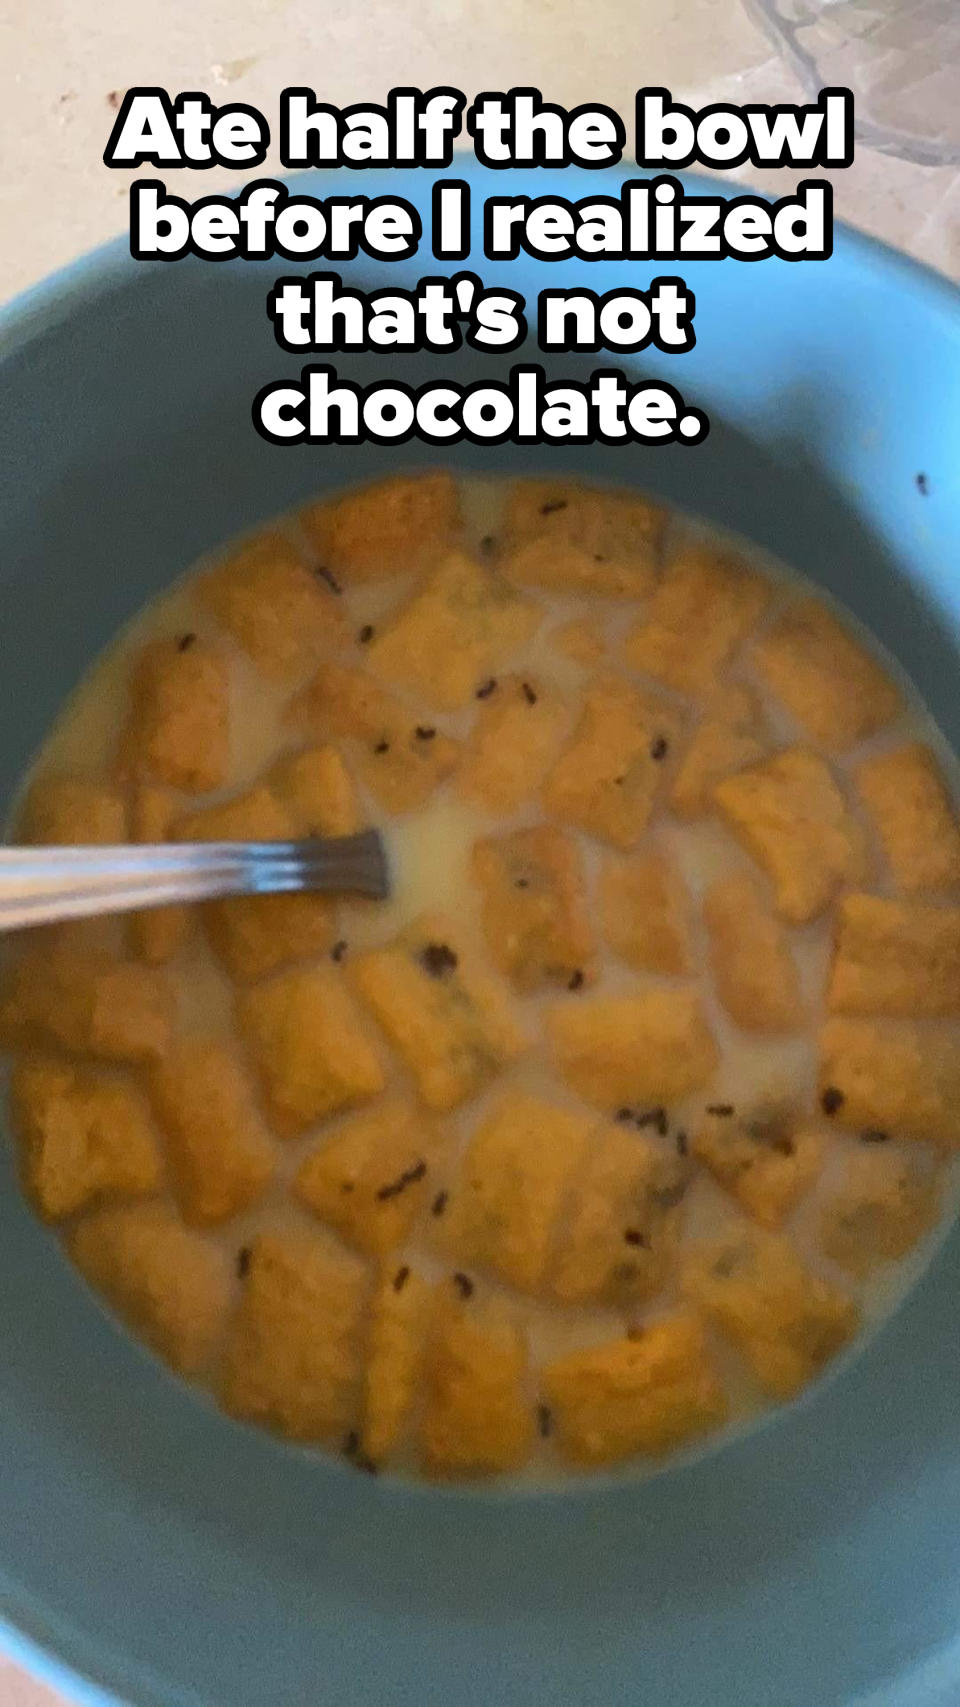 A bowl of cereal with small dark specks in it with the caption, "Ate half the bowl before I realized that's not chocolate"